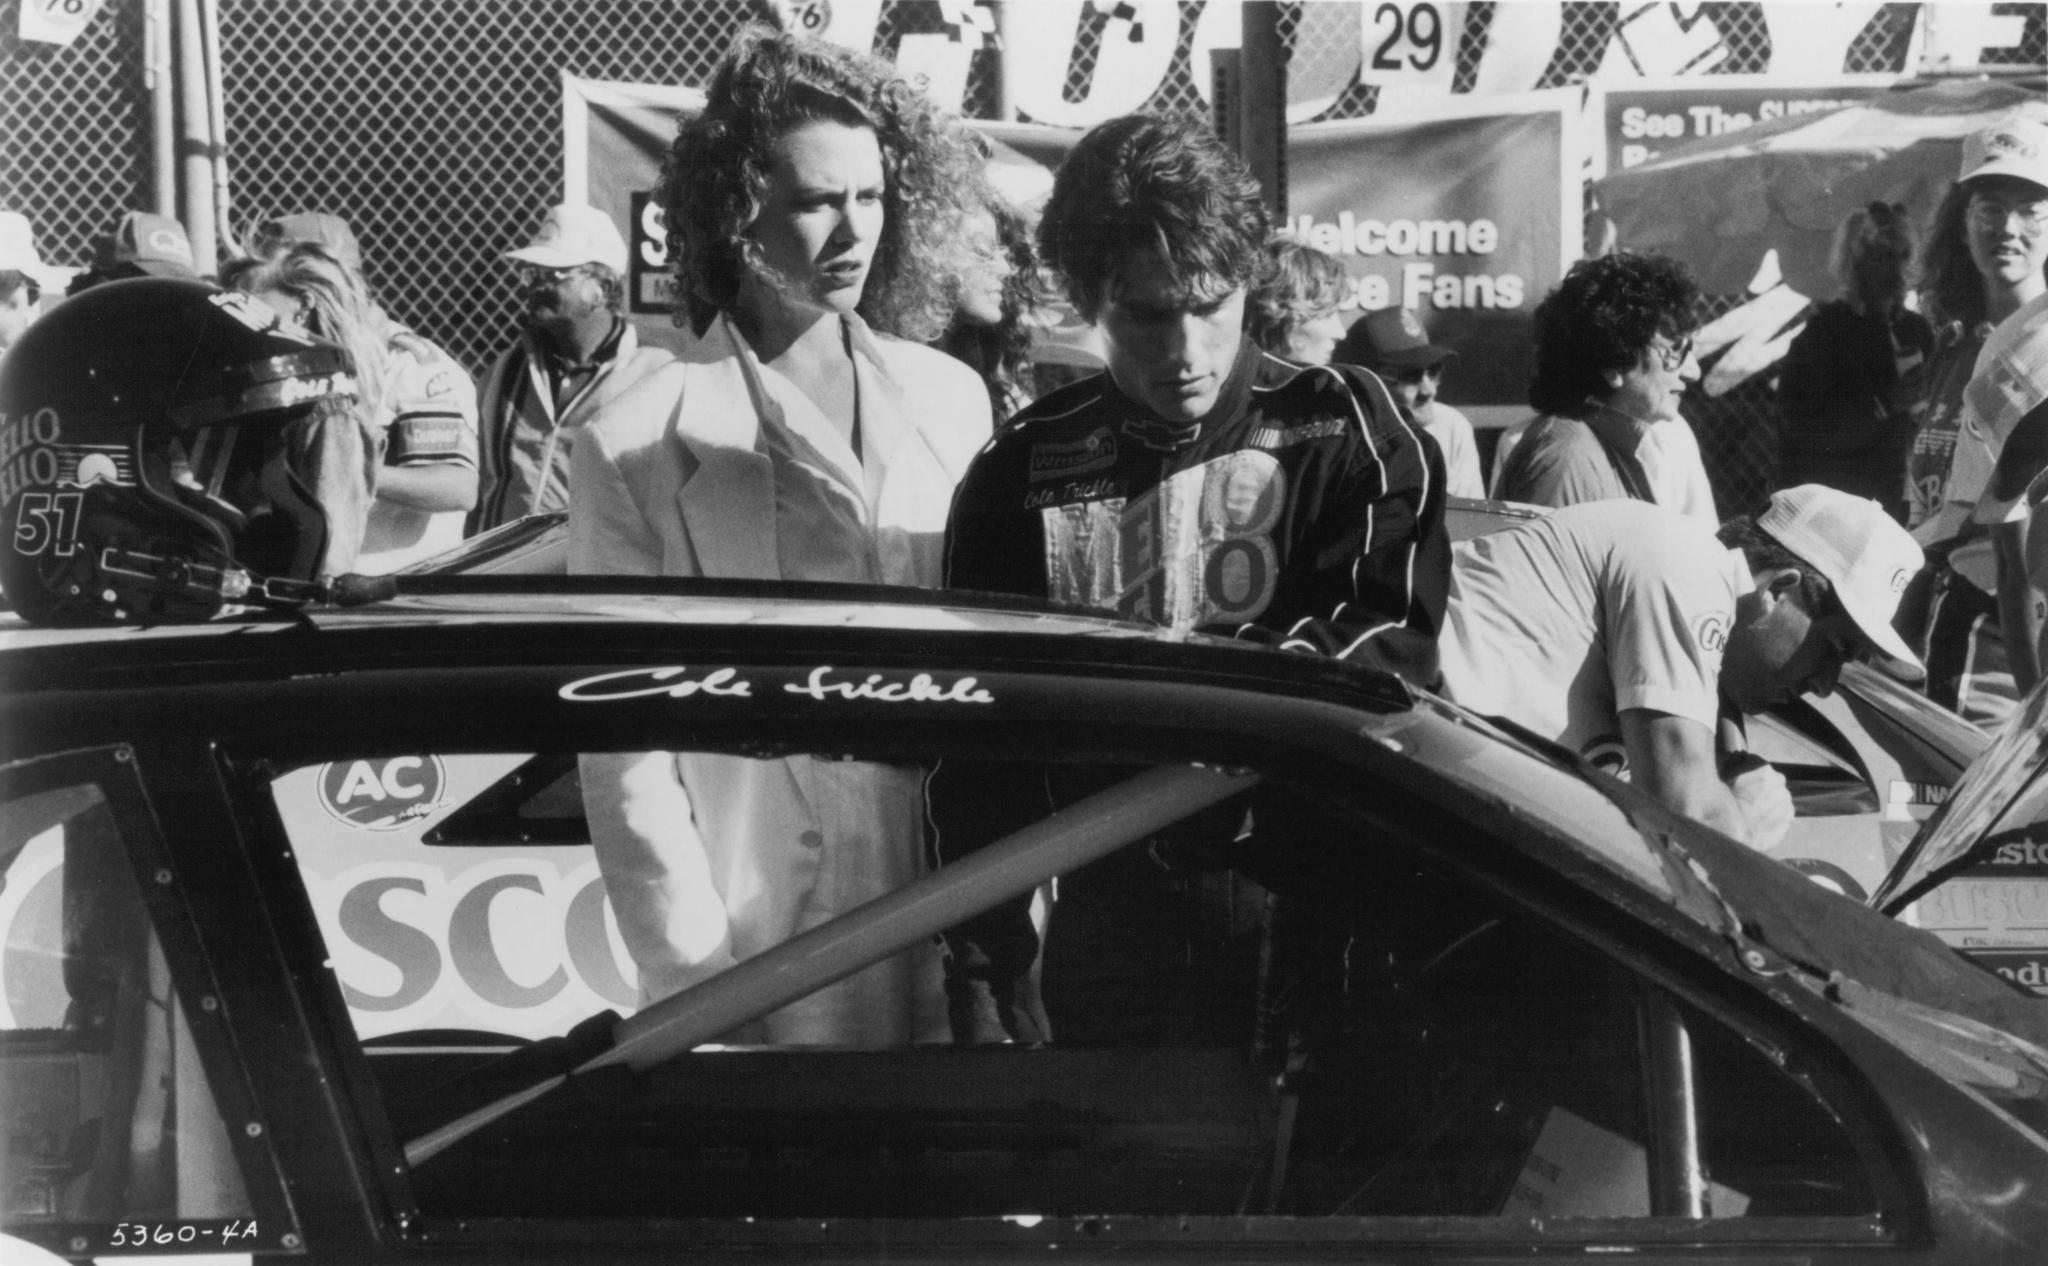 Still of Tom Cruise and Nicole Kidman in Days of Thunder (1990)